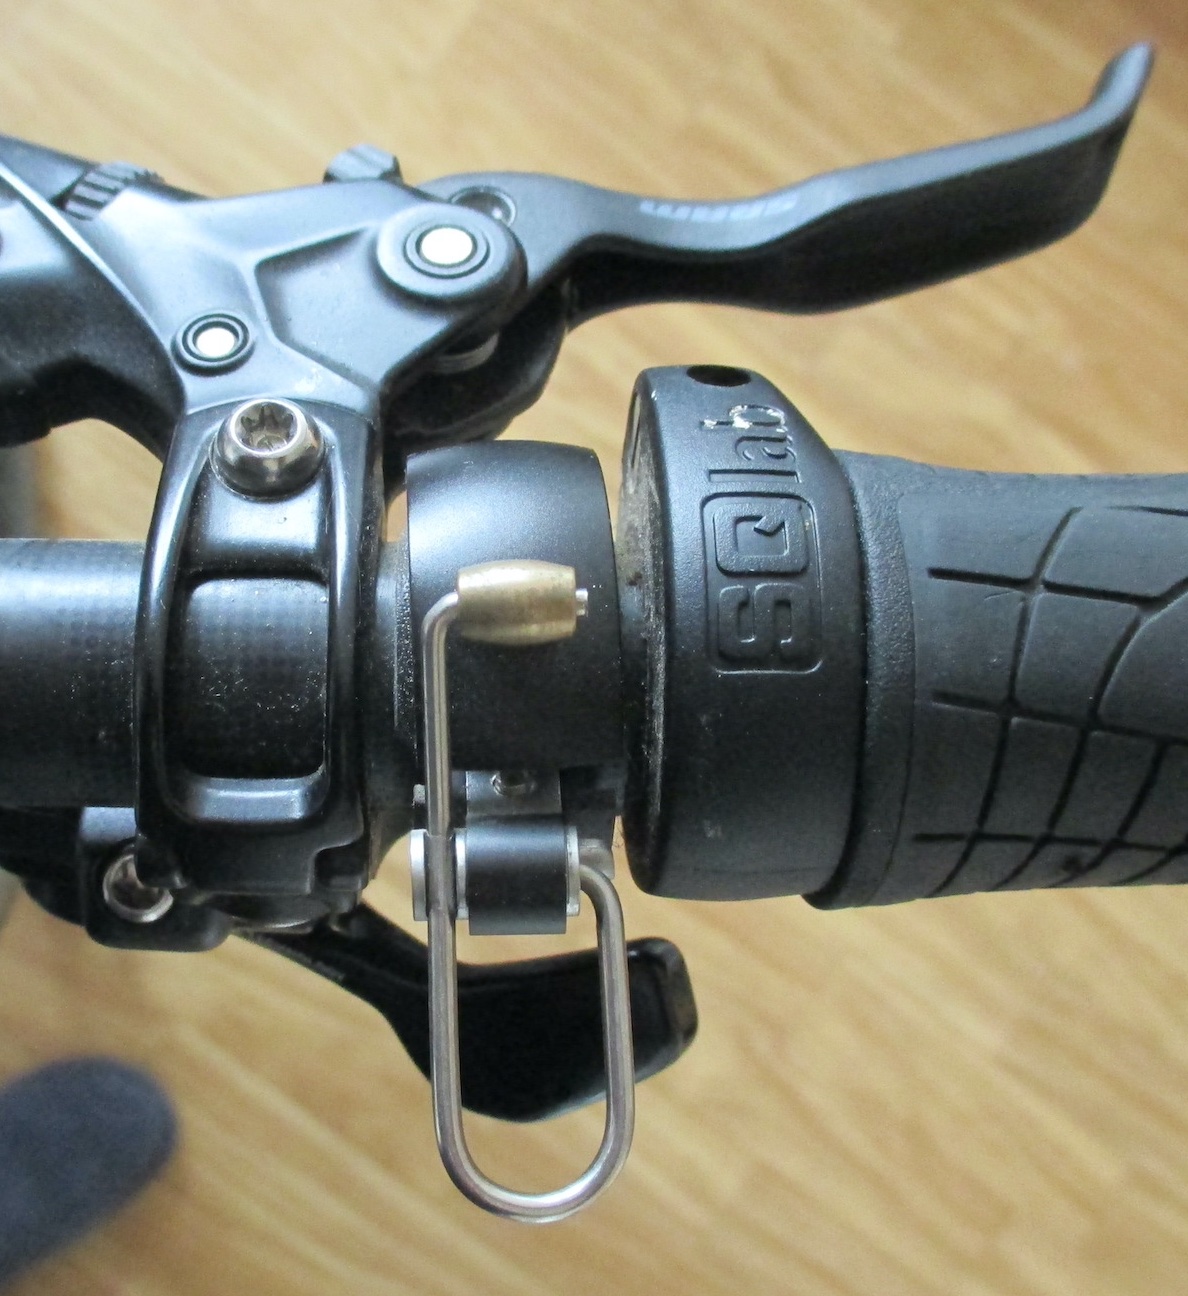 IBC Knog Oi Deluxe.jpg